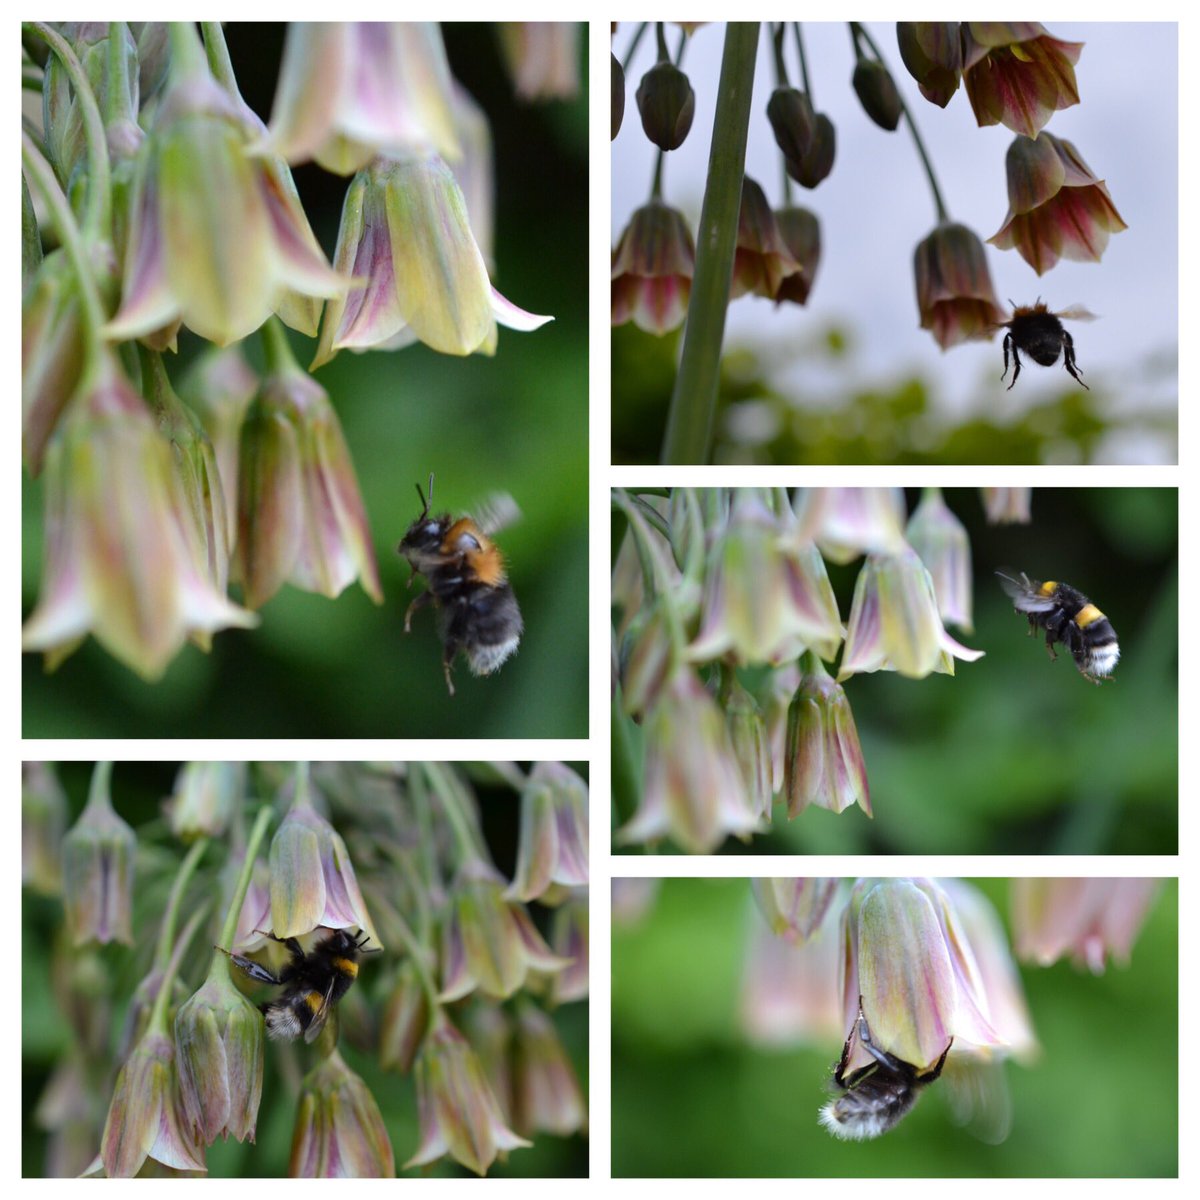 Staying close to home for Day 4 #30DaysWild I noticed how much the bees are loving the beautiful Lily Nectaroscordum I planted in the garden last autumn especially for the 🐝🐝 I thought I’d try a little macro photography but as the saying goes #practisemakesperfect 😉